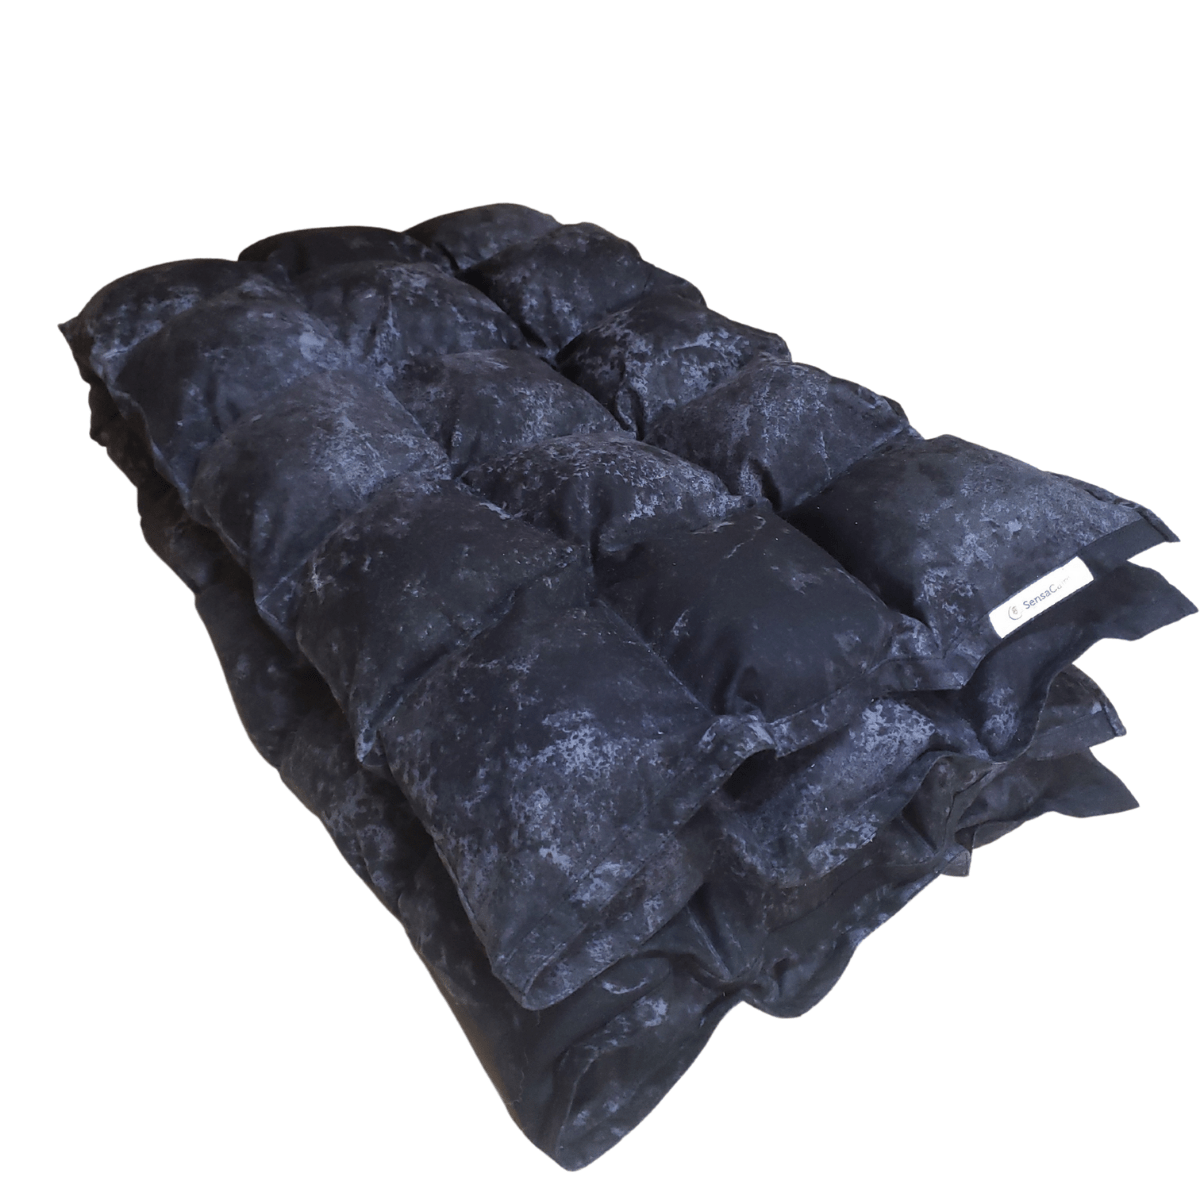 SensaCalm Weighted Blanket - Full Size (56" x 72") For Adults Classic Weighted Blanket Stone Black